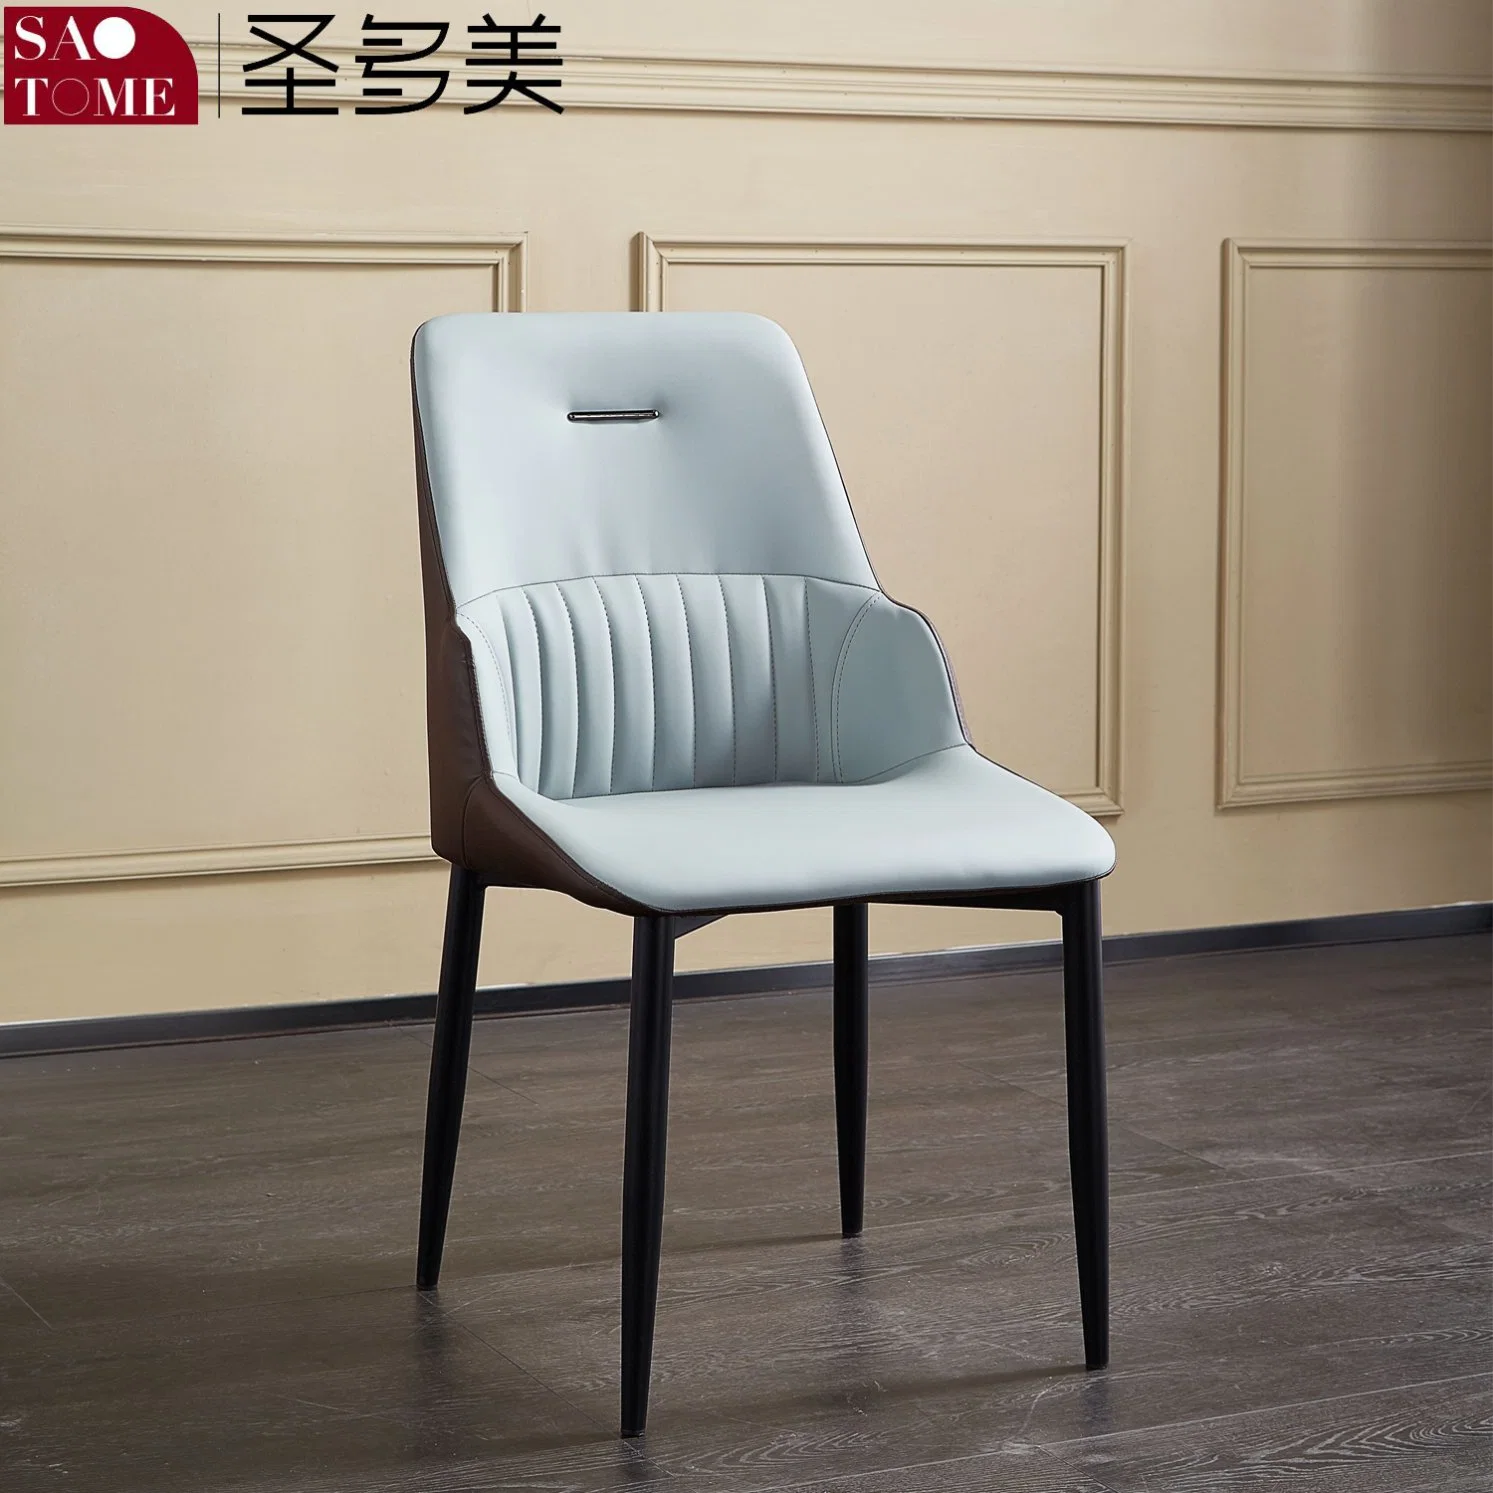 Modern Dining Chairs Lounge Chairs Upscale Dining Stools Restaurant Chairs